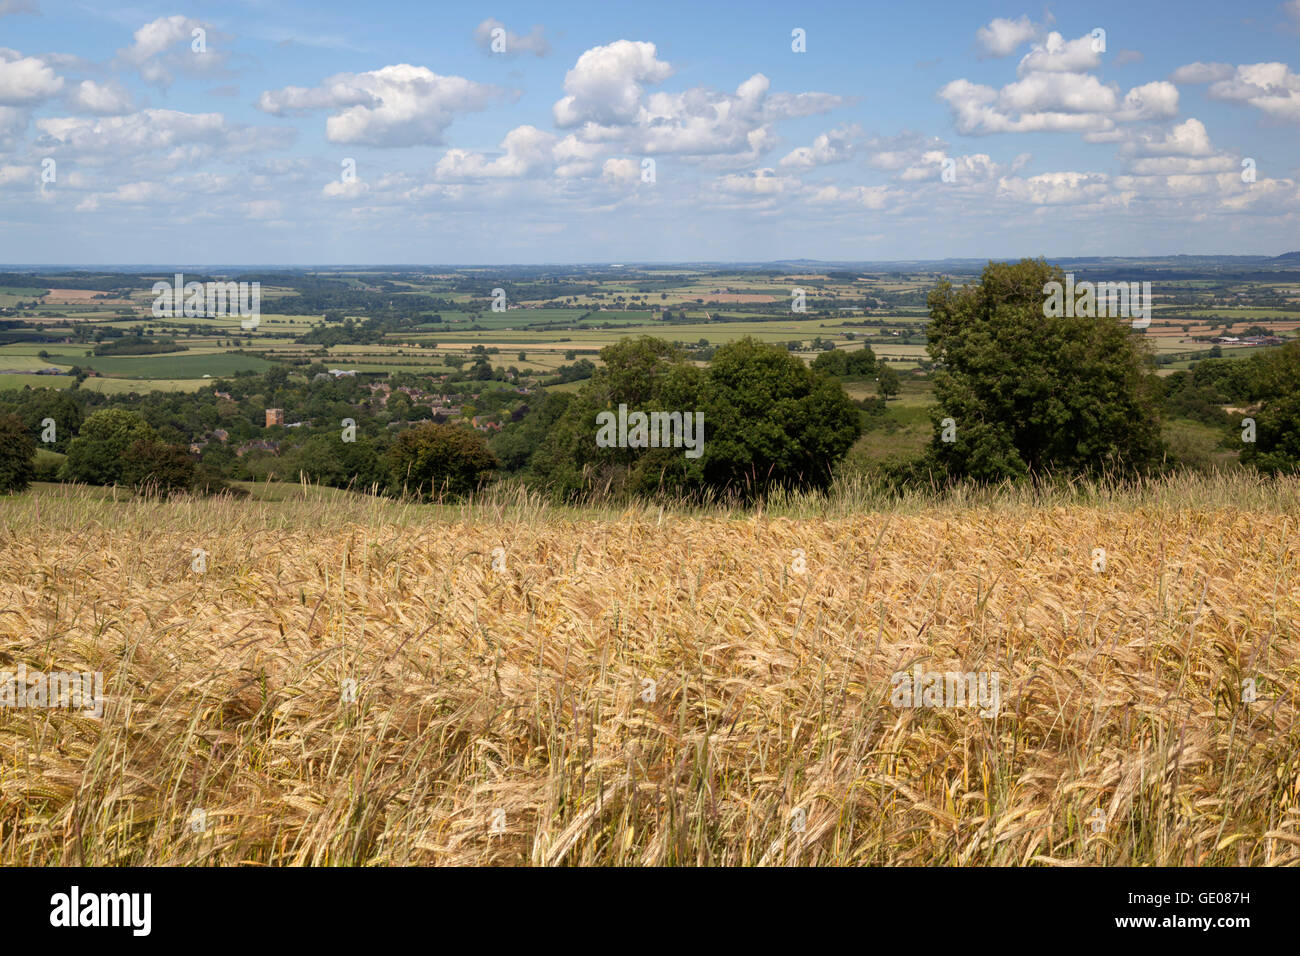 View over Barley field and village of Ilmington with Warwickshire countryside, Ilmington, Cotswolds, Warwickshire, England, UK Stock Photo